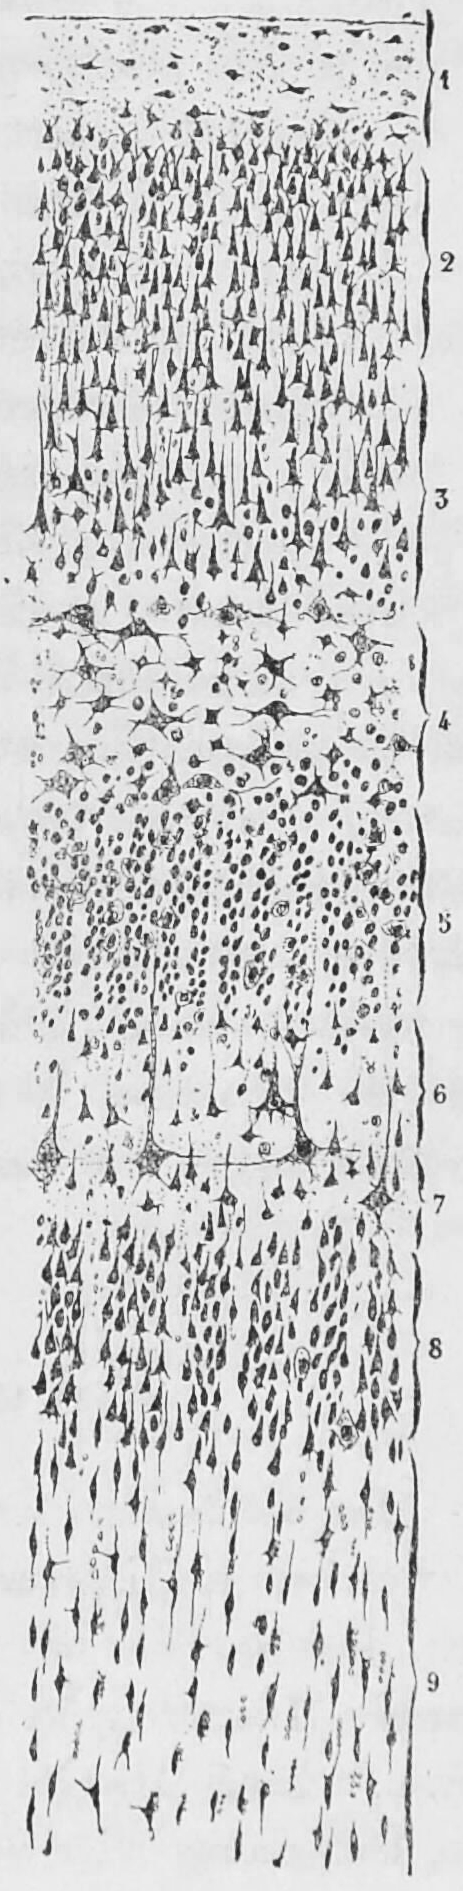 A section of the visual cortex close to the calcarine fissure from the brain of a 29 year old male. Cajal distinguished 9 different layers based on differences of the morpholical features of groups of neurons. Studien über die Hirnrinde des Menschen by S. R. y Cajal